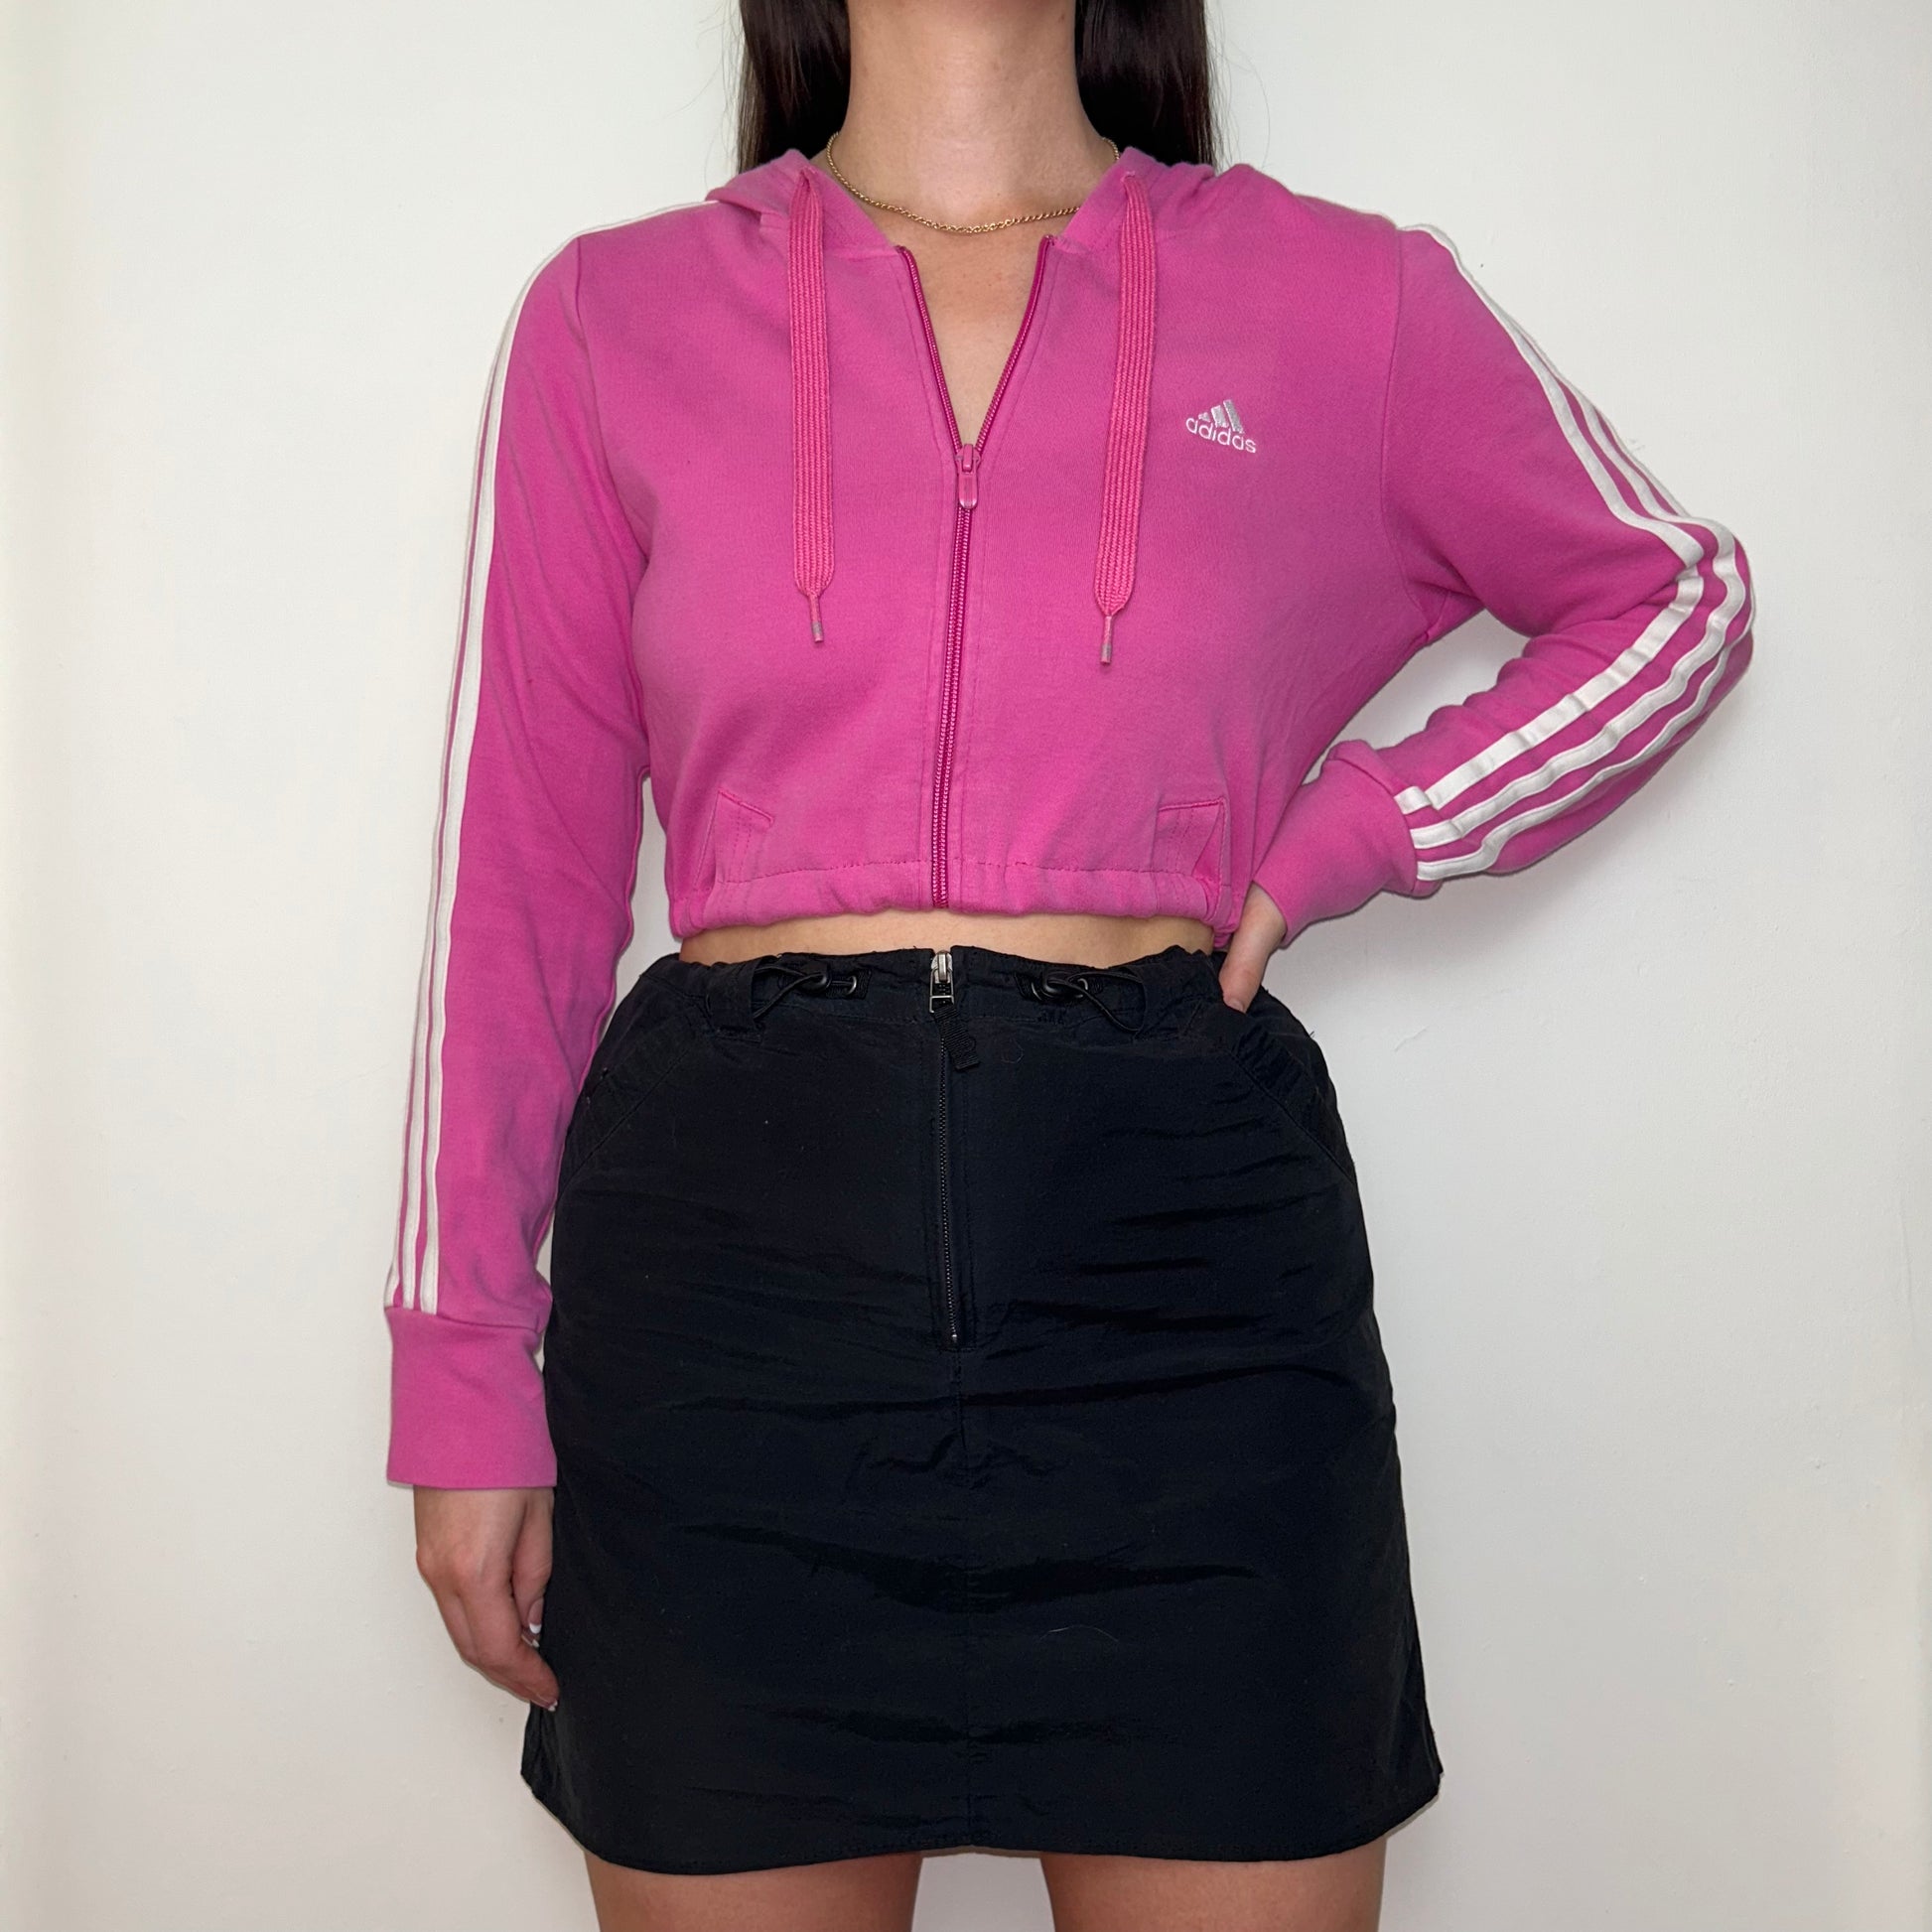 pink zip up hoodie with white adidas logo shown on a model wearing a black mini skirt